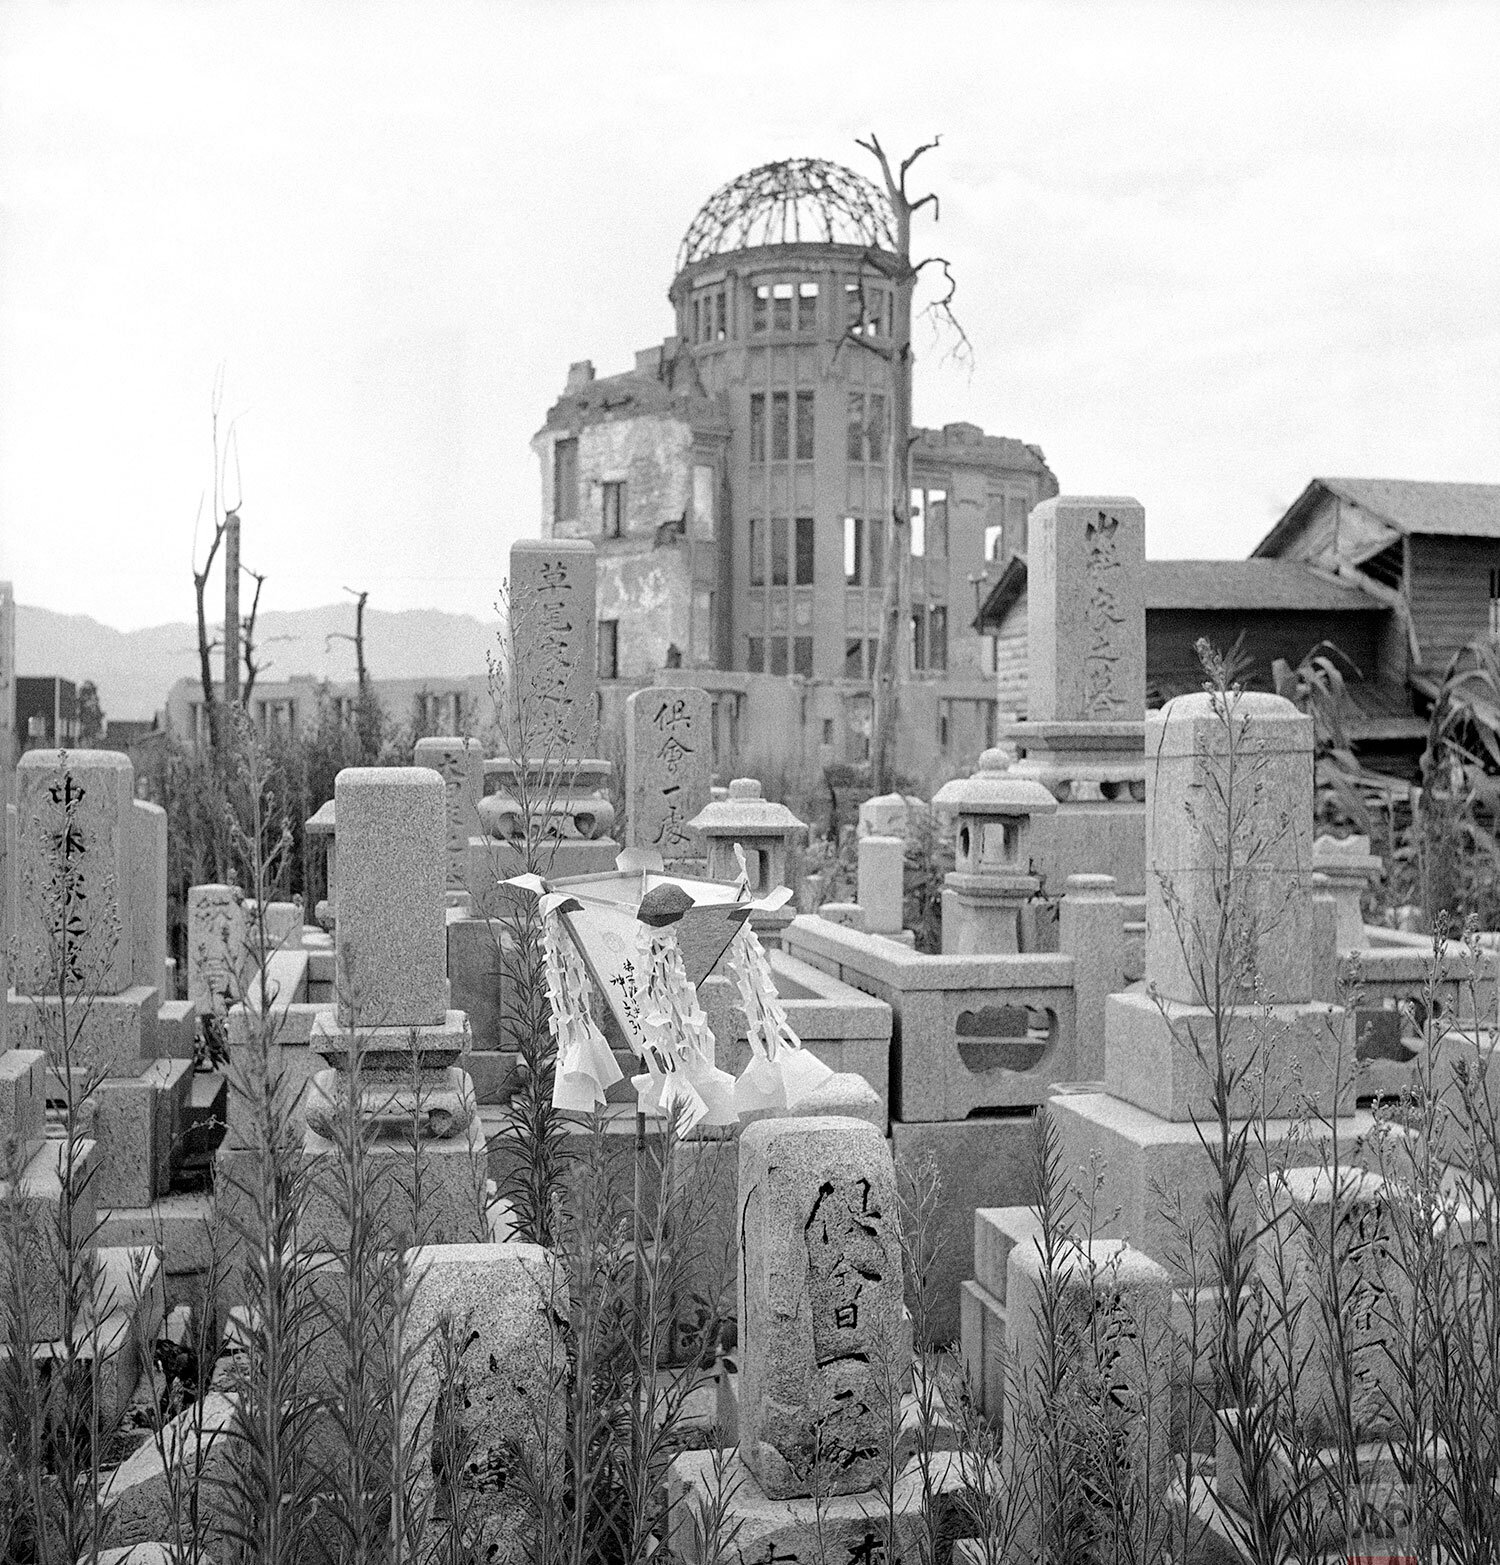  The graveyard of the Sairenji Temple near the center of the A-bomb blast in Hiroshima, Japan on August 7, 1948, background steel frame is Exhibition Gallery, which has been left un-repaired as a monument. (AP Photo) 